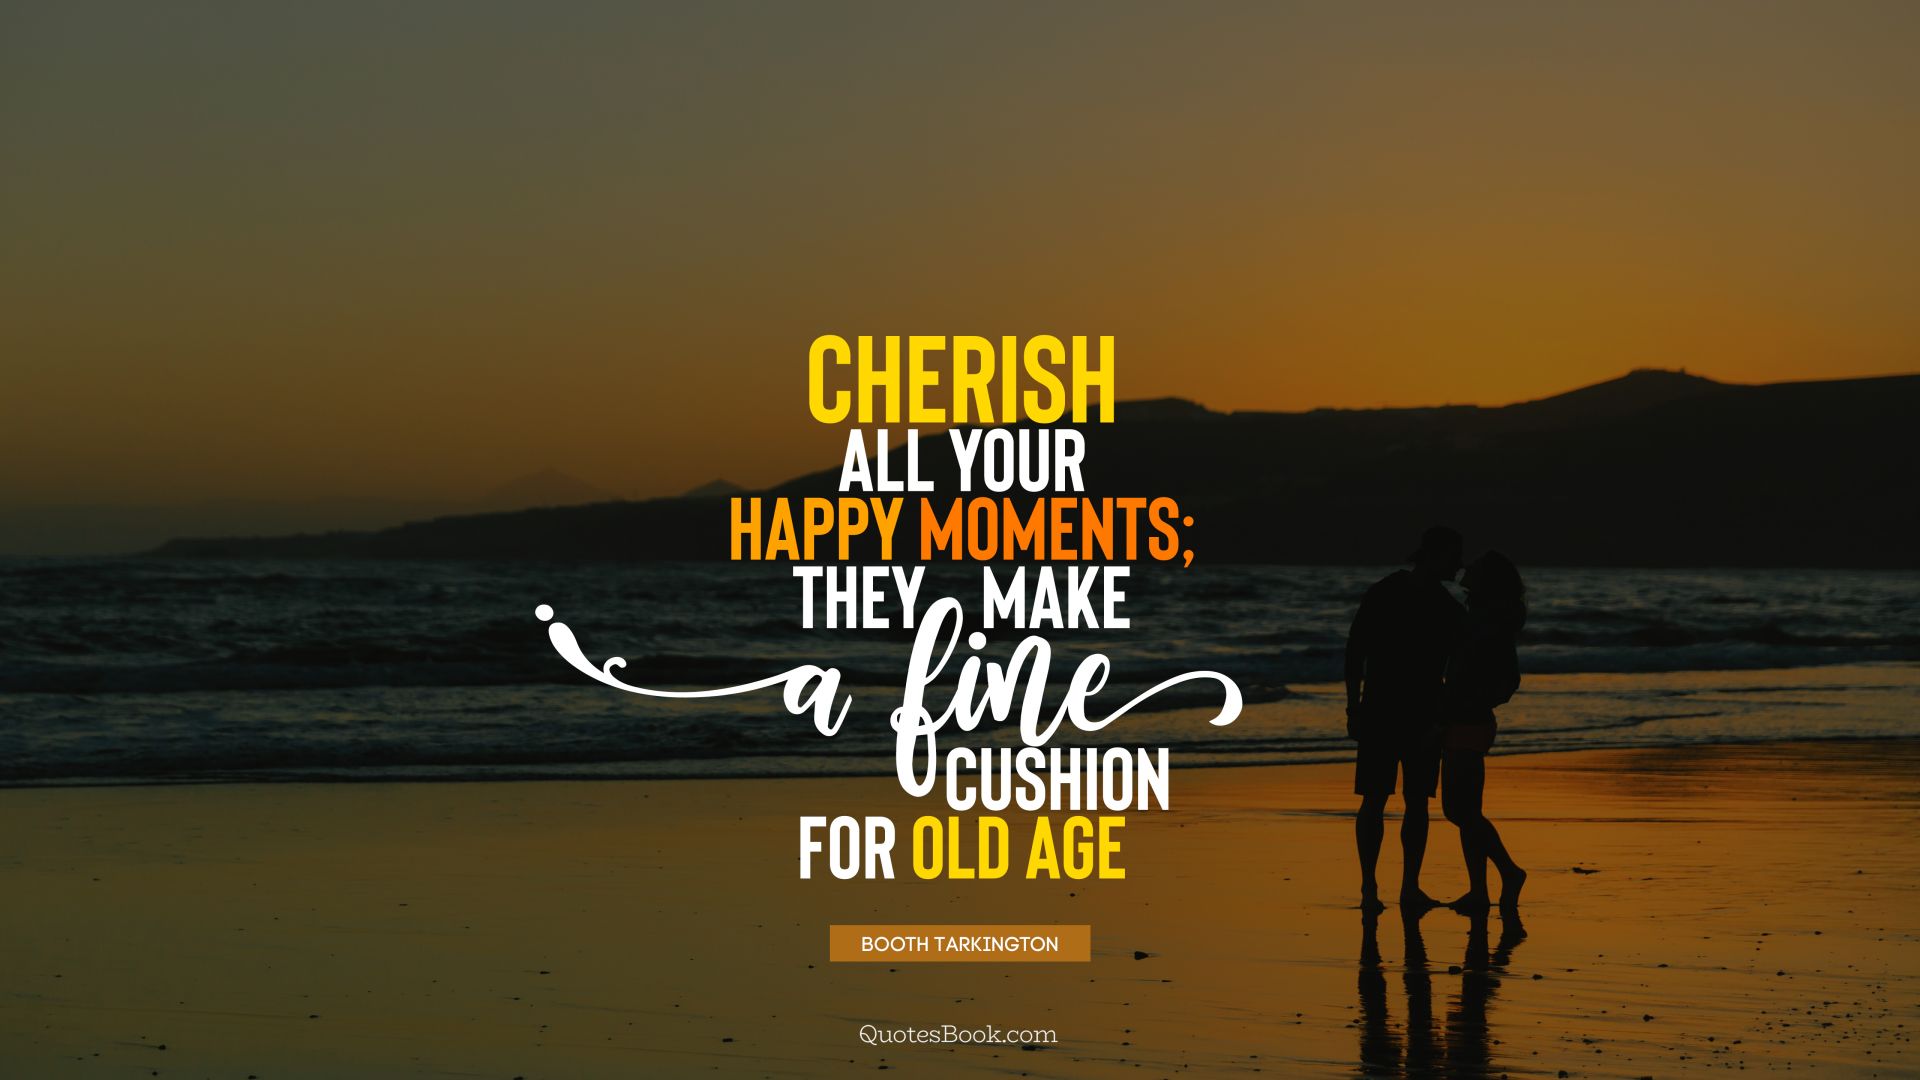 Cherish all your happy moments; they make a fine cushion for old age. - Quote by Booth Tarkington